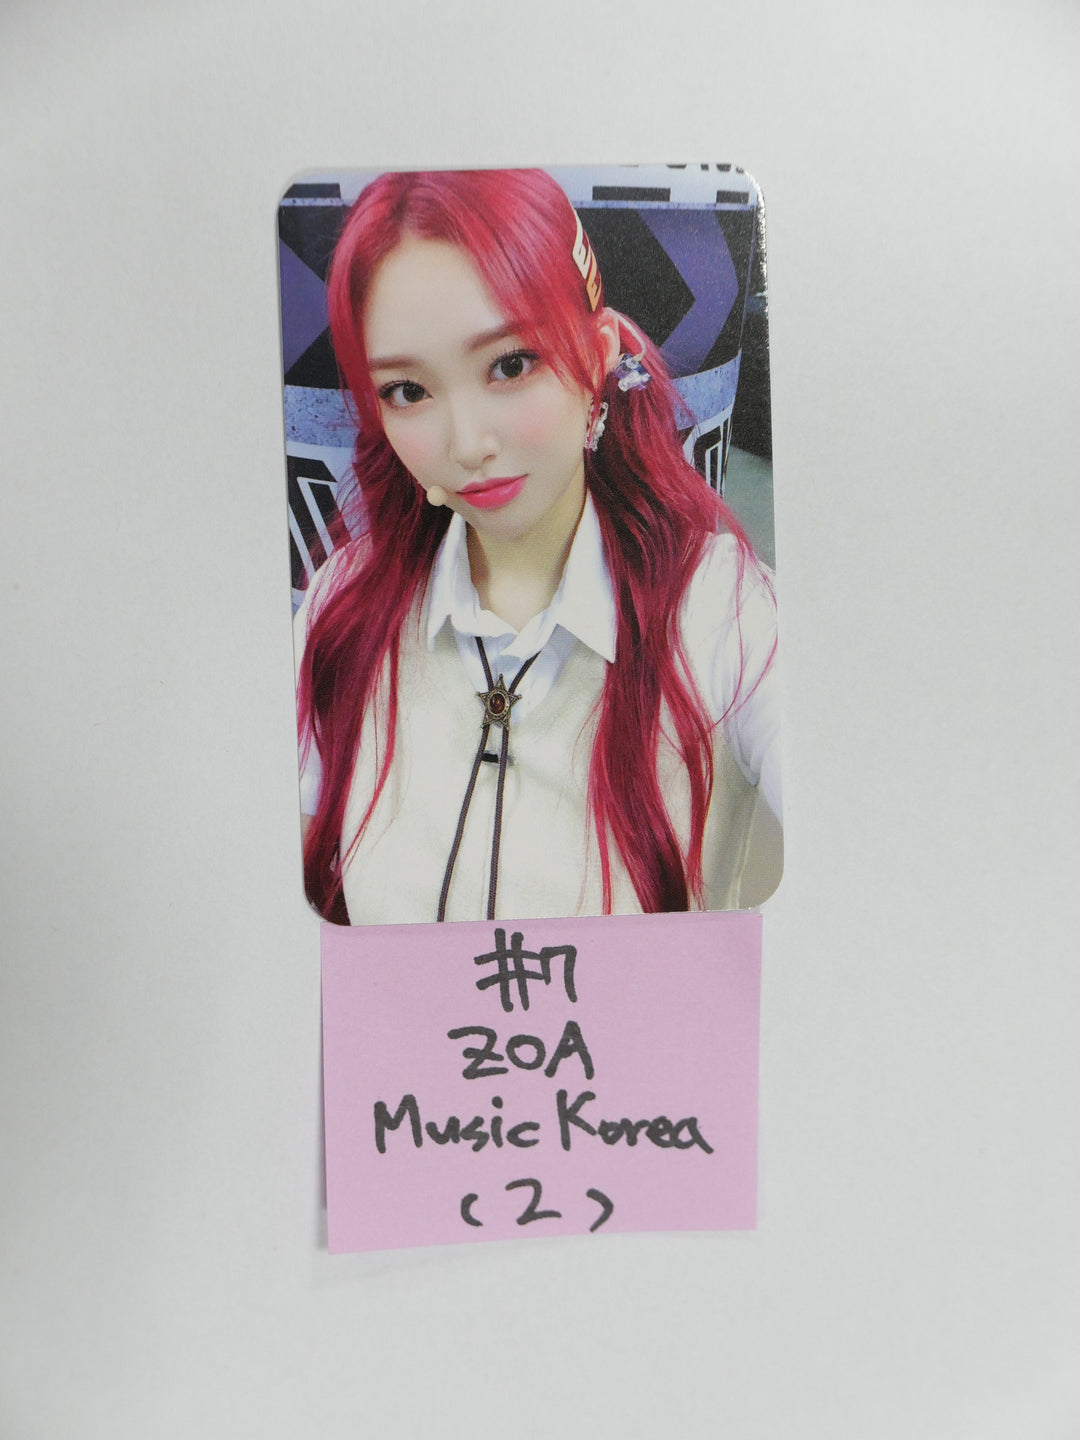 Weeekly "Play Game: Holiday" - Musickorea Fan Sign Event Photocard Round 2